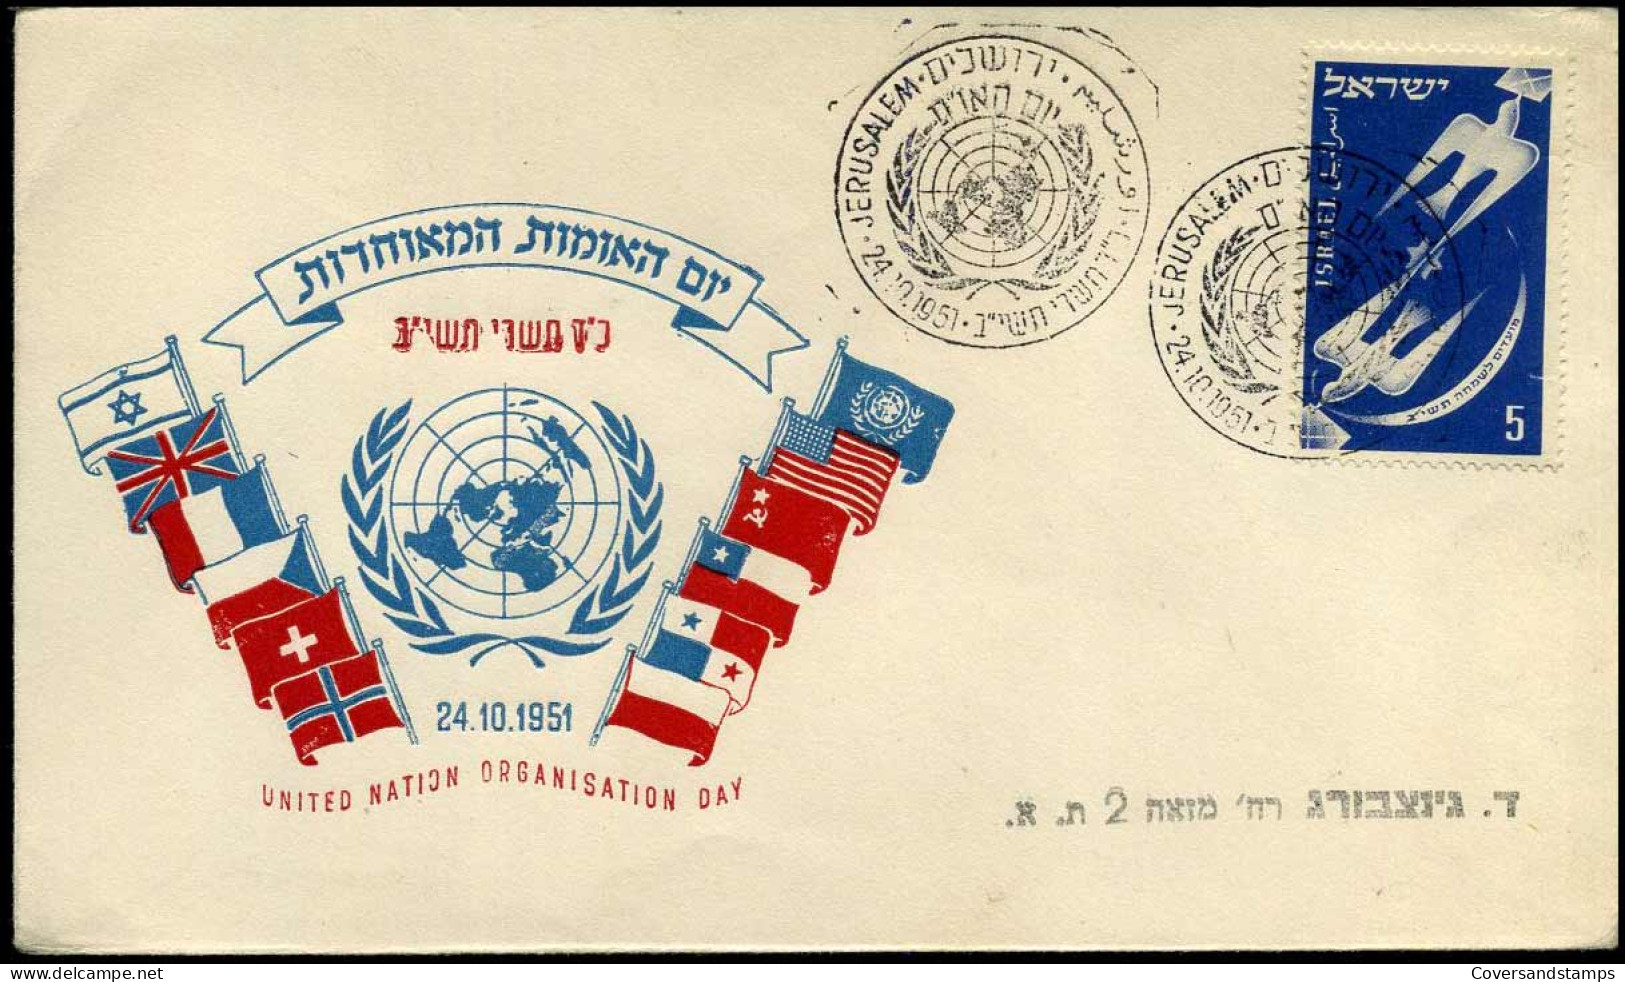 FDC - United Nation Organisation Day - 24-10-1951 - FDC